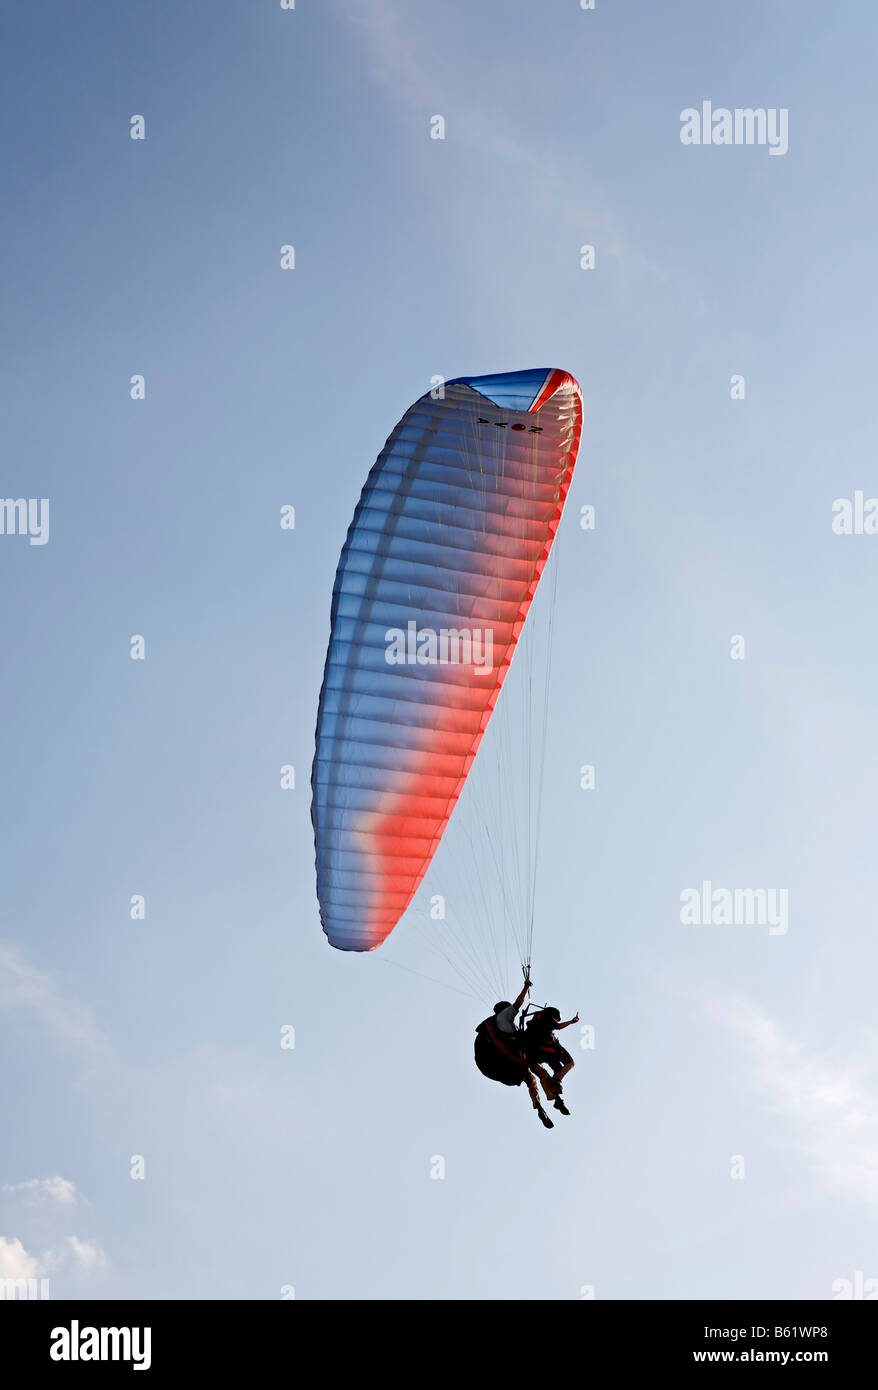 Man and boy hanging together on a paraglider, Air Show, Aero Club Duesseldorf, Nordrhein-Westfalen, Germany, Europe Stock Photo